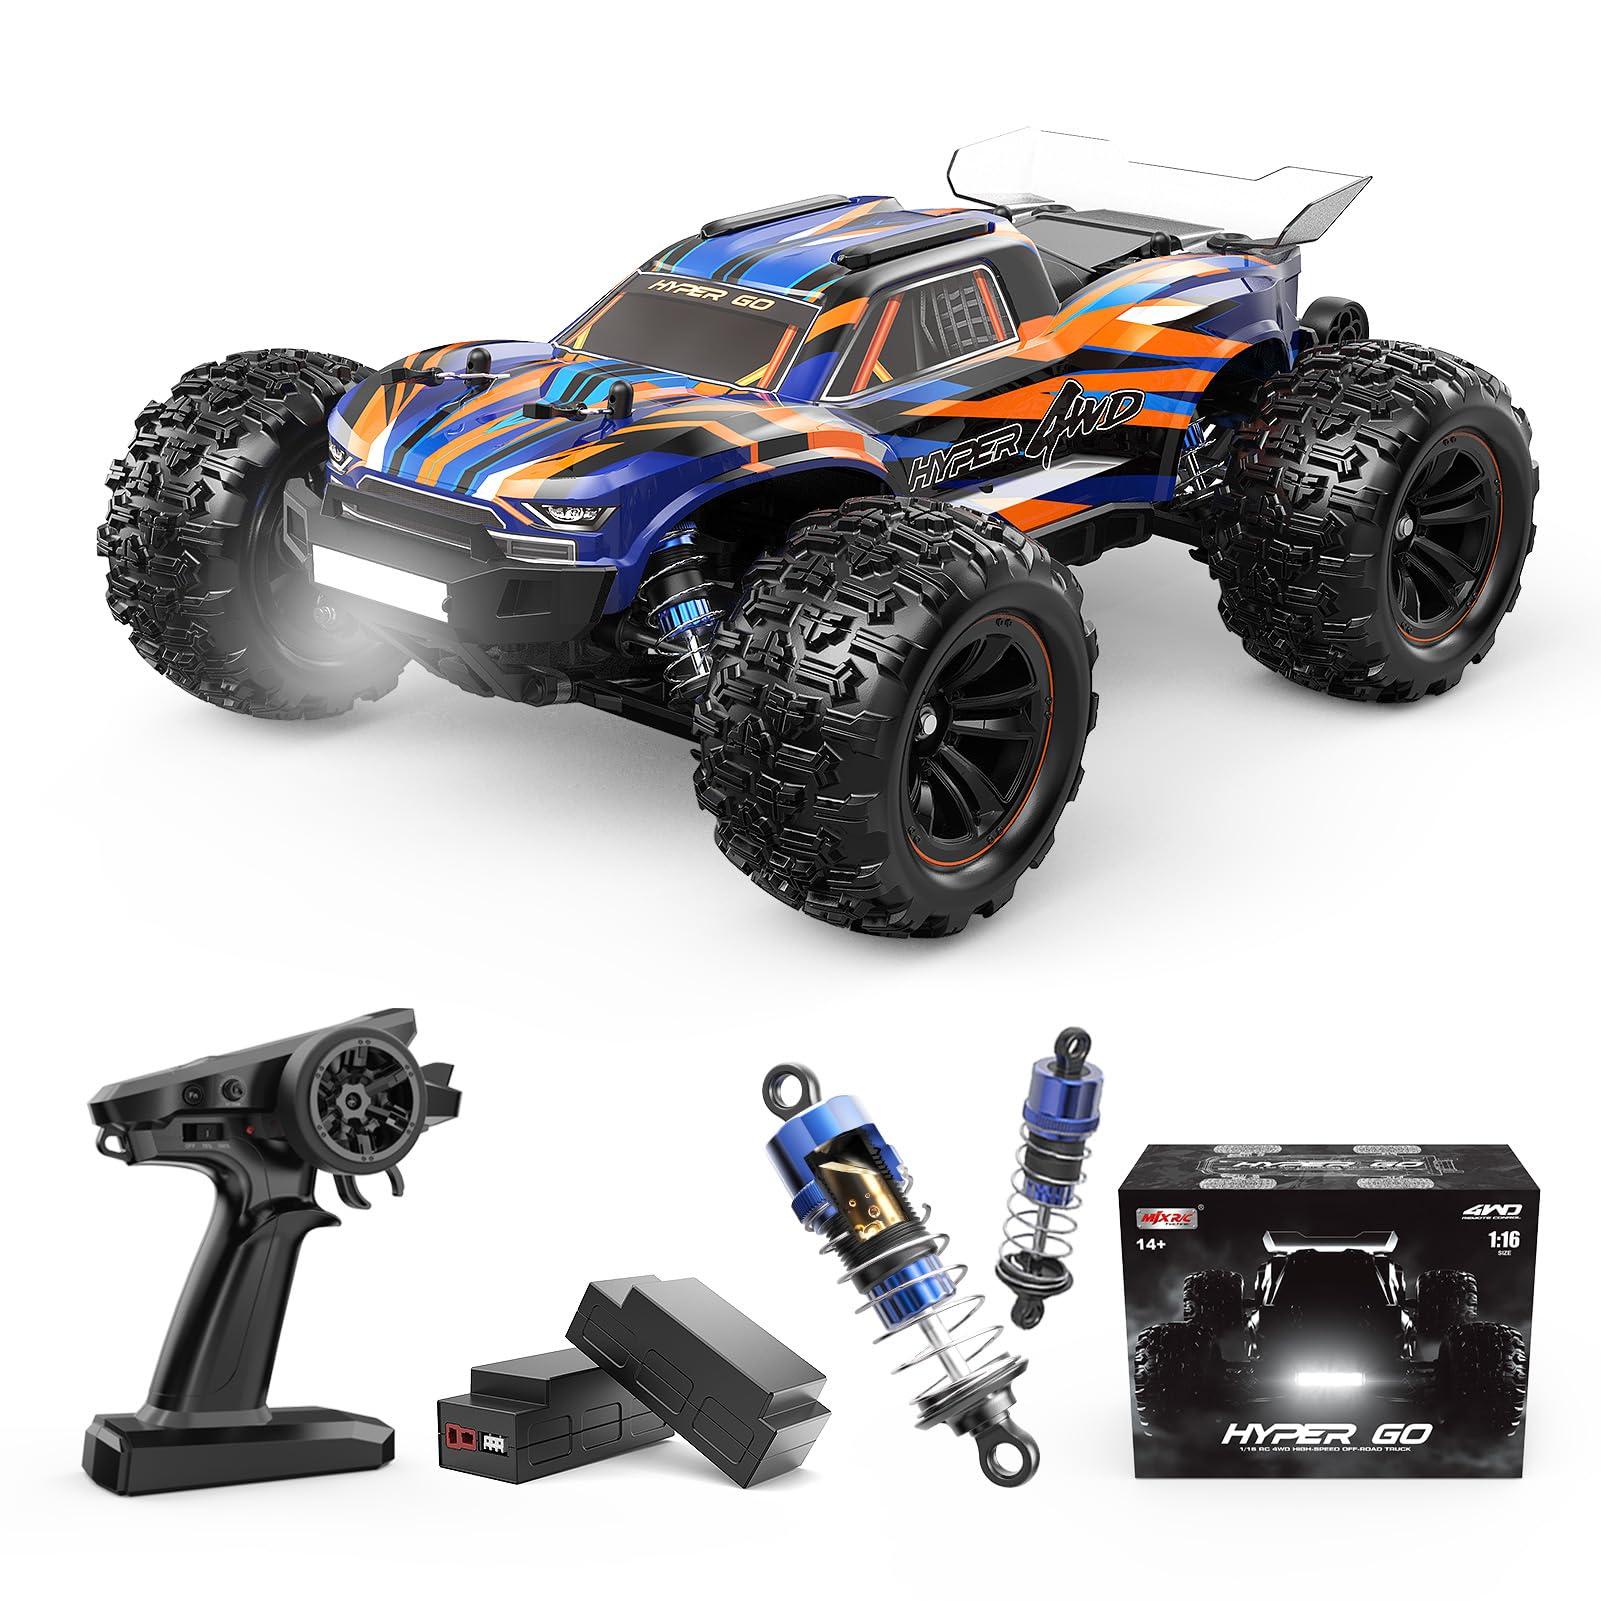 Rc Cars For Sale Near Me: Local and Online Options for RC Cars For Sale Near Me